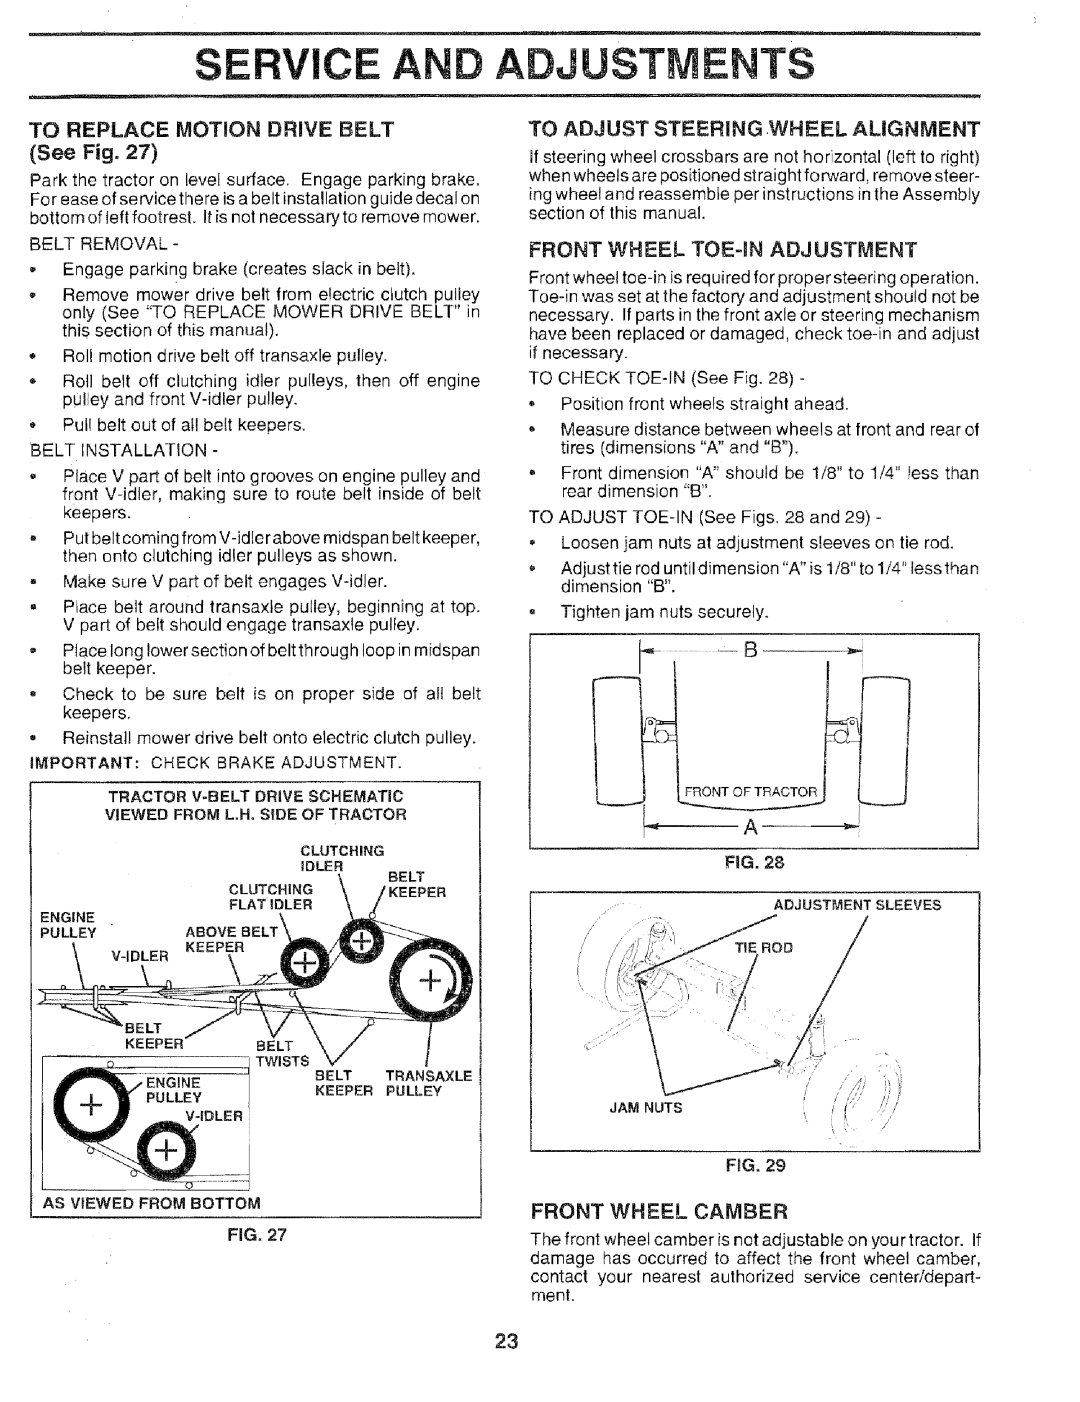 Sears 917.25051 manual Service And Adjustments, TO REPLACE MOTION DRIVE BELT See Fig, To Adjust Steering .Wheel Alignment 